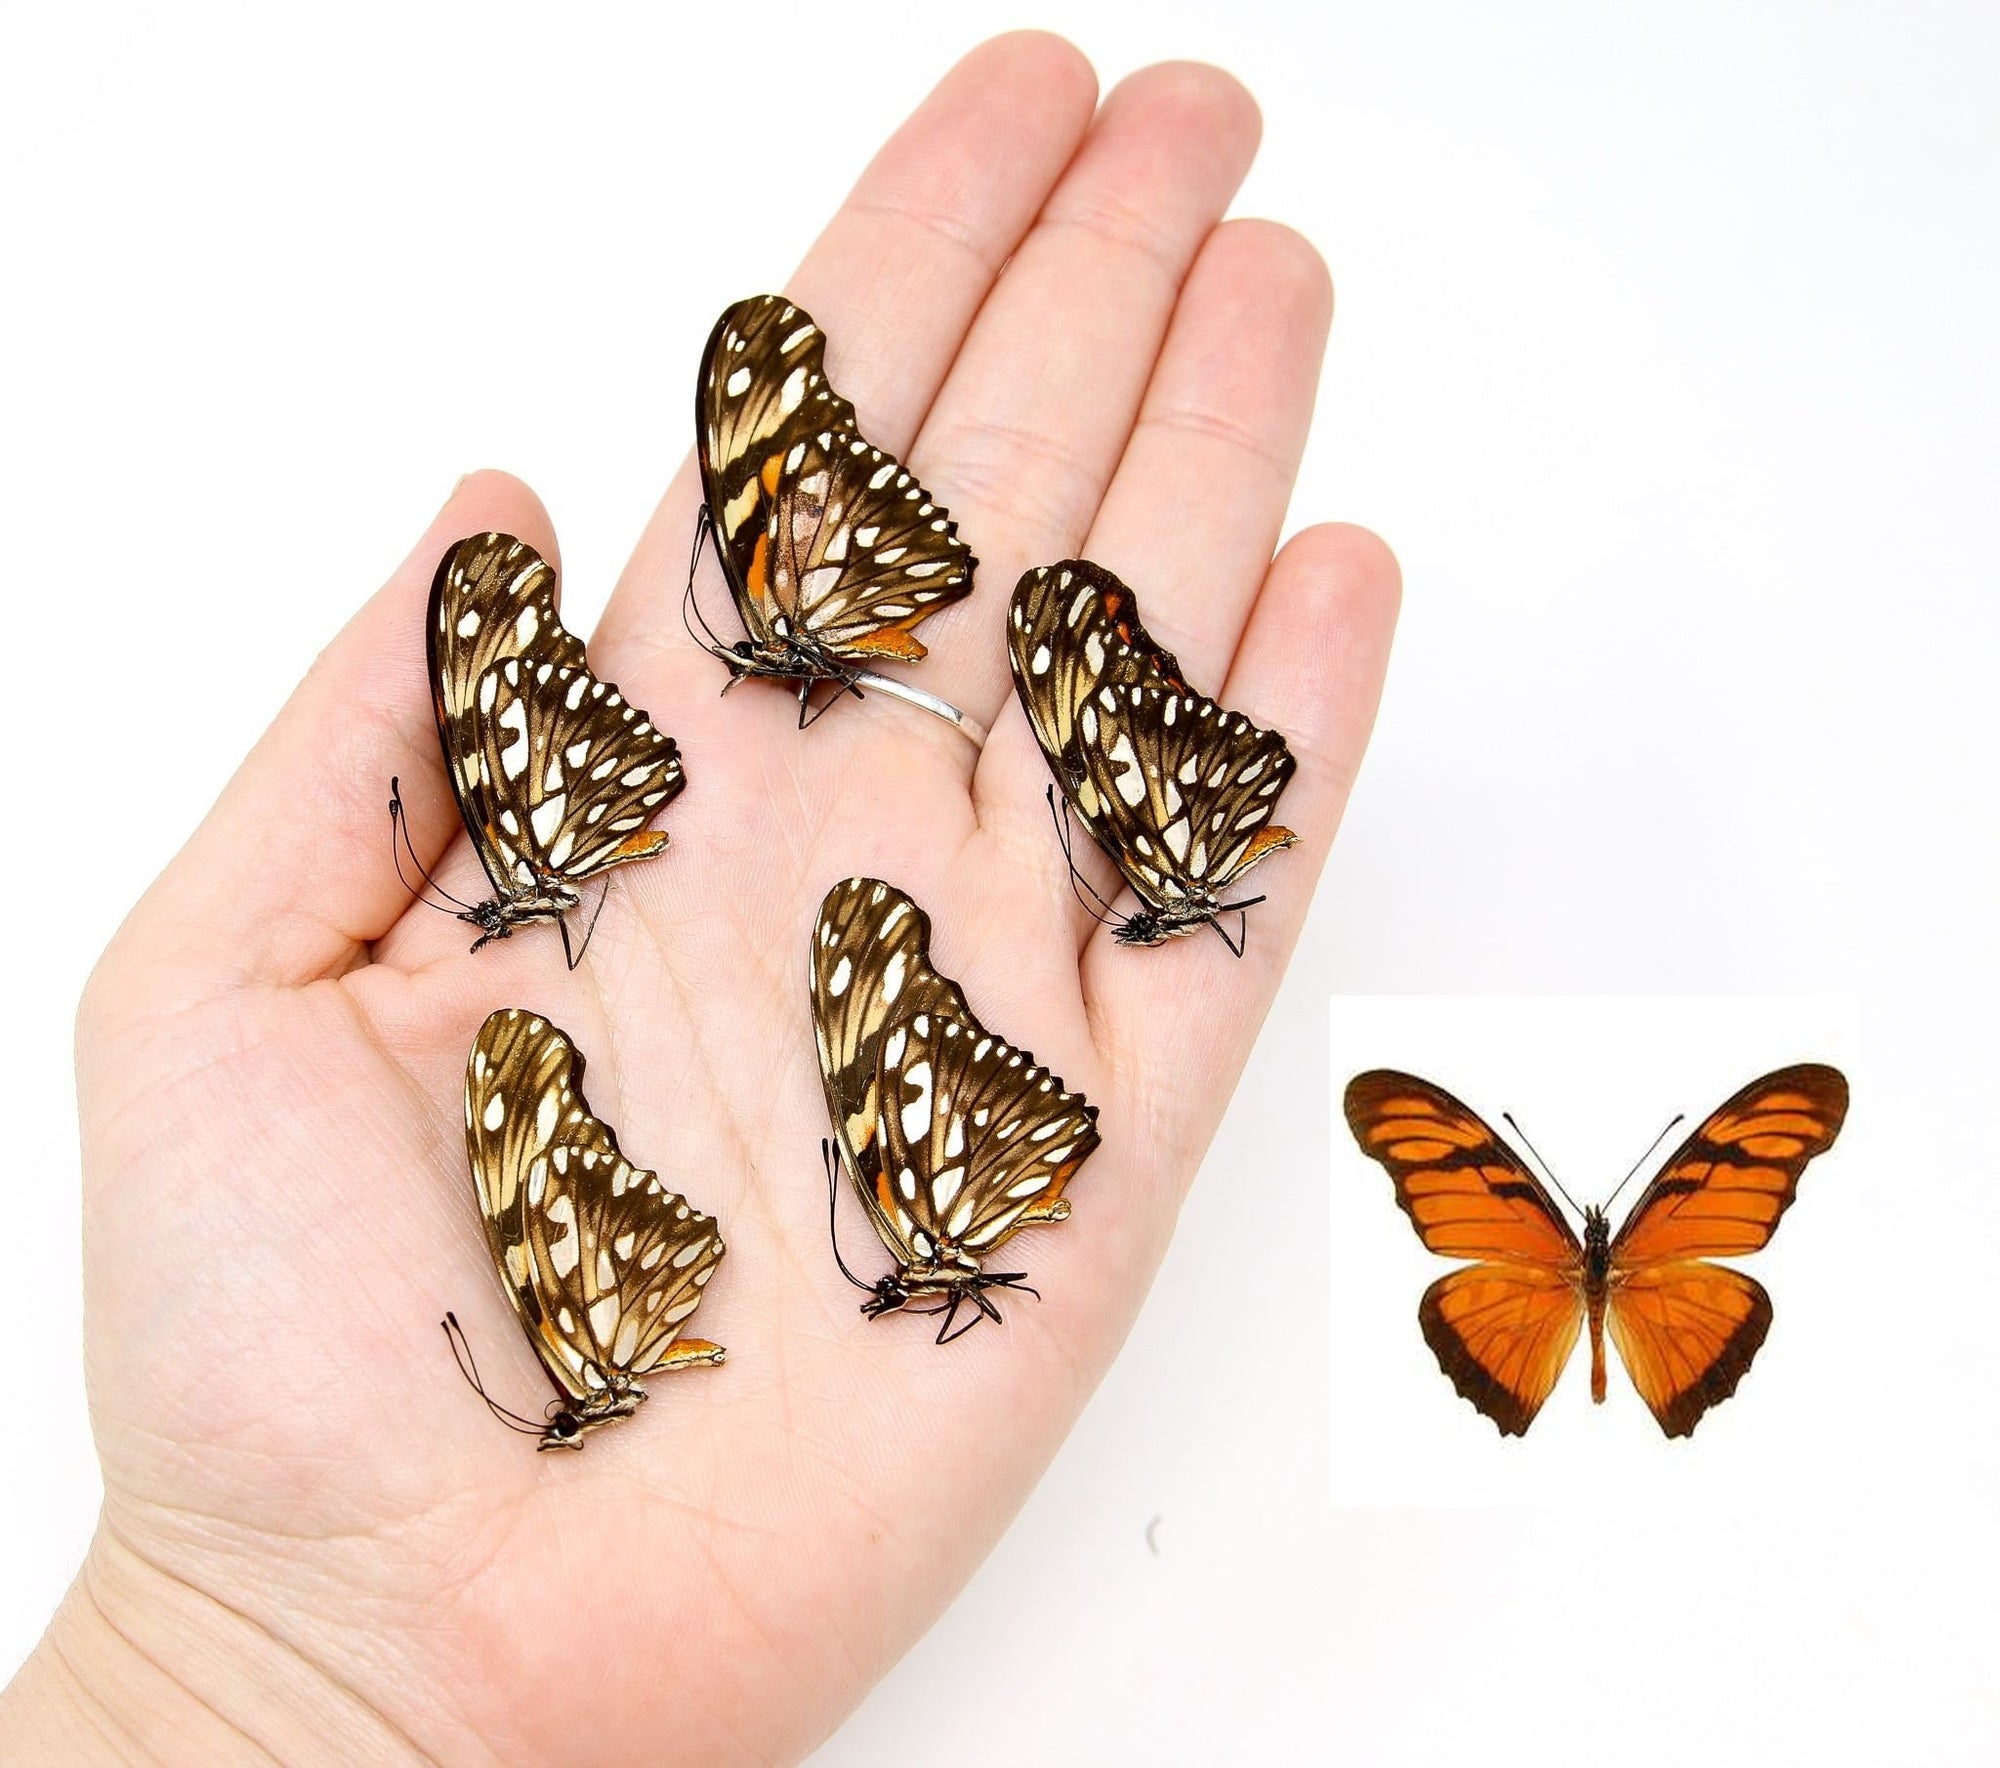 Five (5) Juno Silverspot (Dione juno) A1 Real Dry-Preserved Butterflies, Unmounted Entomology Taxidermy Specimens